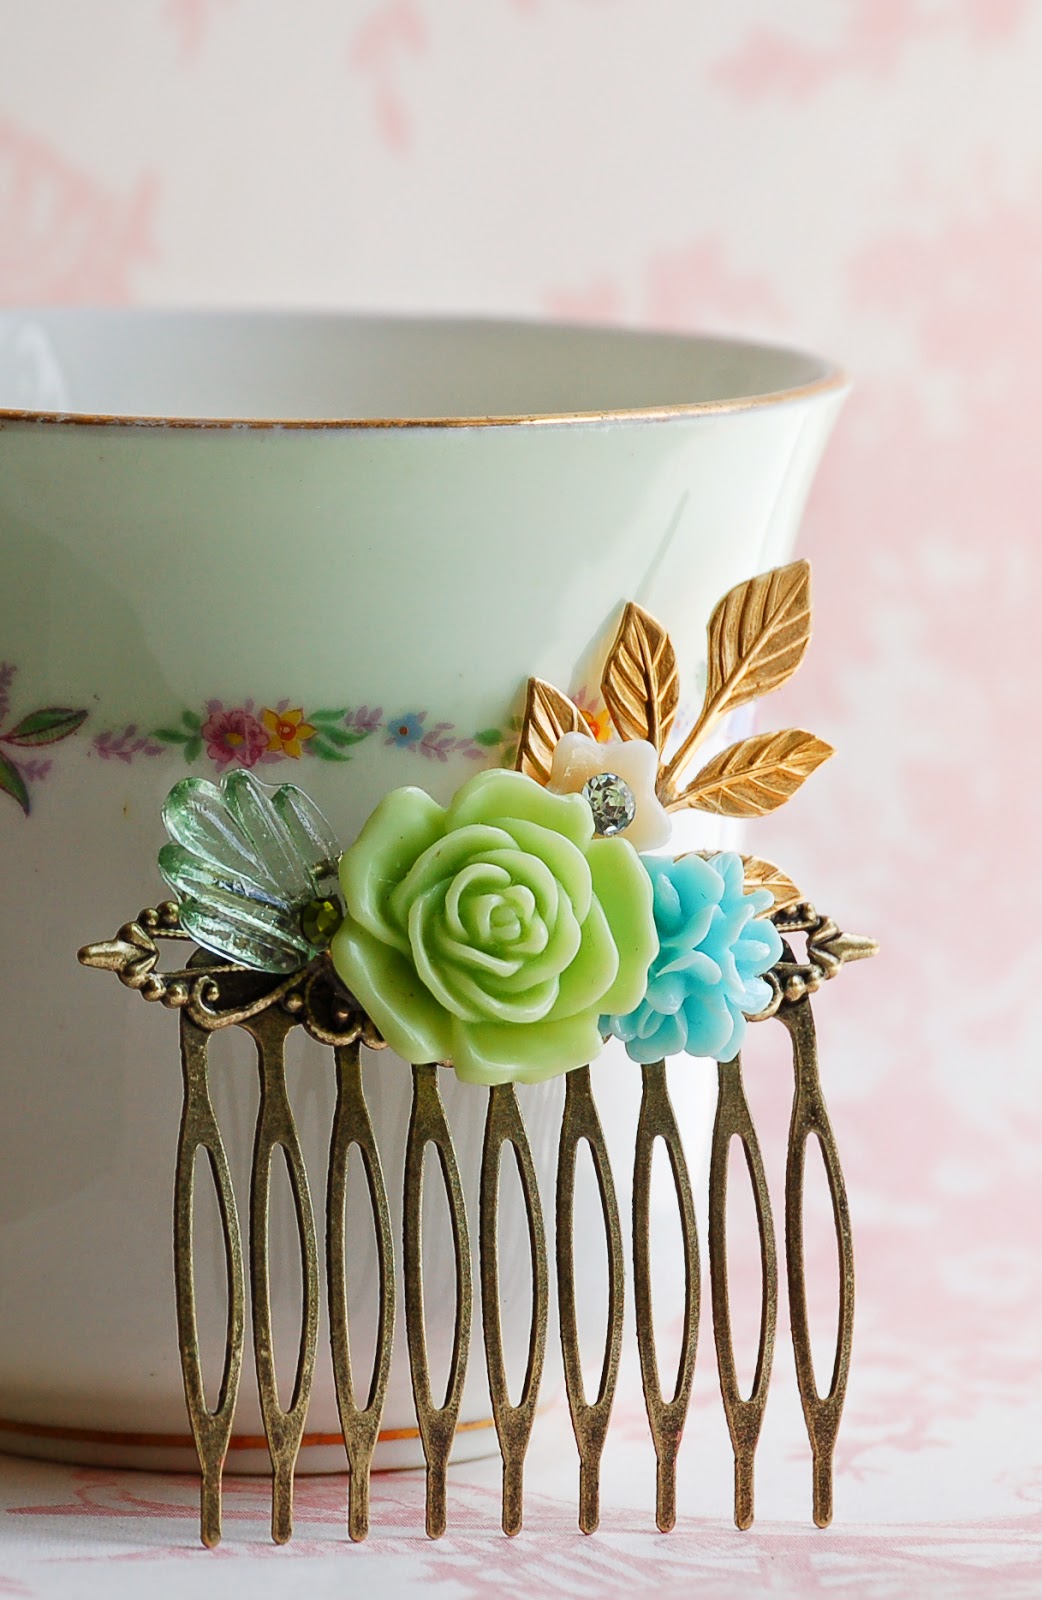 https://www.etsy.com/listing/191447315/lime-green-rose-flower-hair-comb-aqua?ref=shop_home_active_1&ga_search_query=flower%2Bhair%2Bcombs